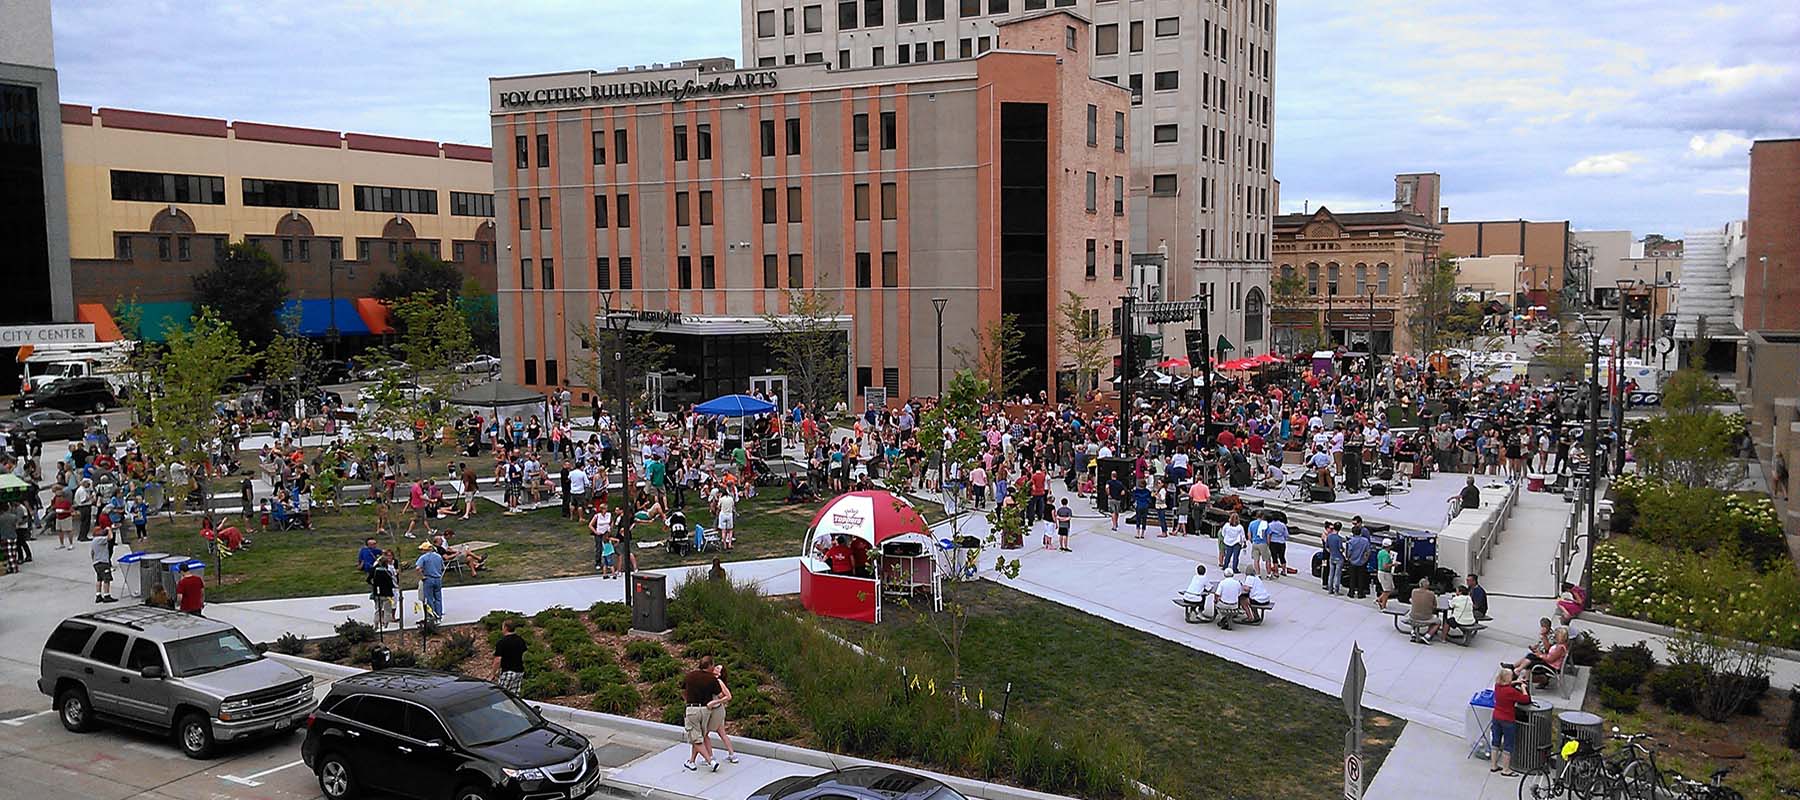 Mile of music in Houdini Plaza downtown Appleton, WI